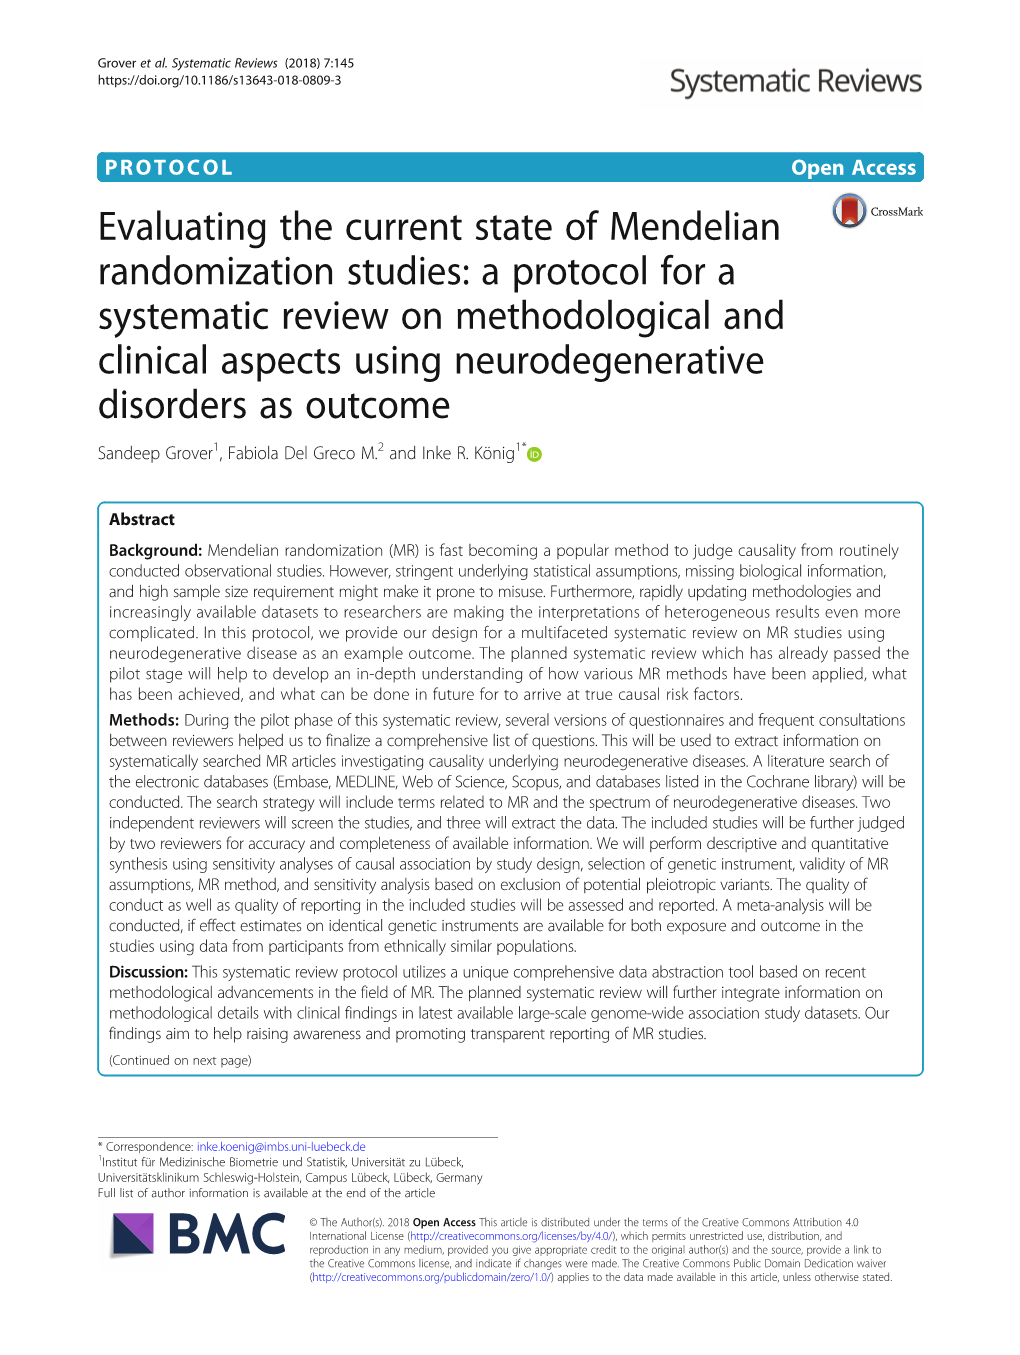 Evaluating the Current State of Mendelian Randomization Studies: a Protocol for a Systematic Review on Methodological and Clinic